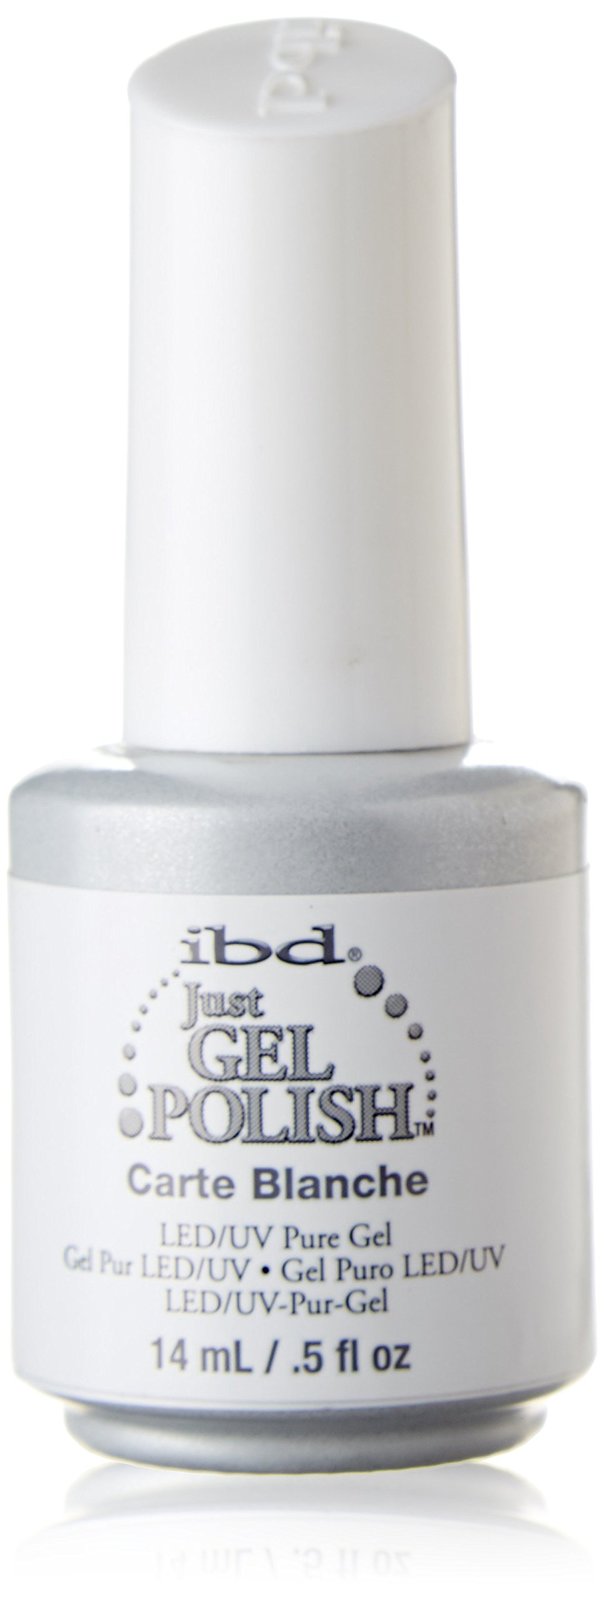 Primary image for IBD Just Gel Soak Off White Nail Polish, Carte Blanche